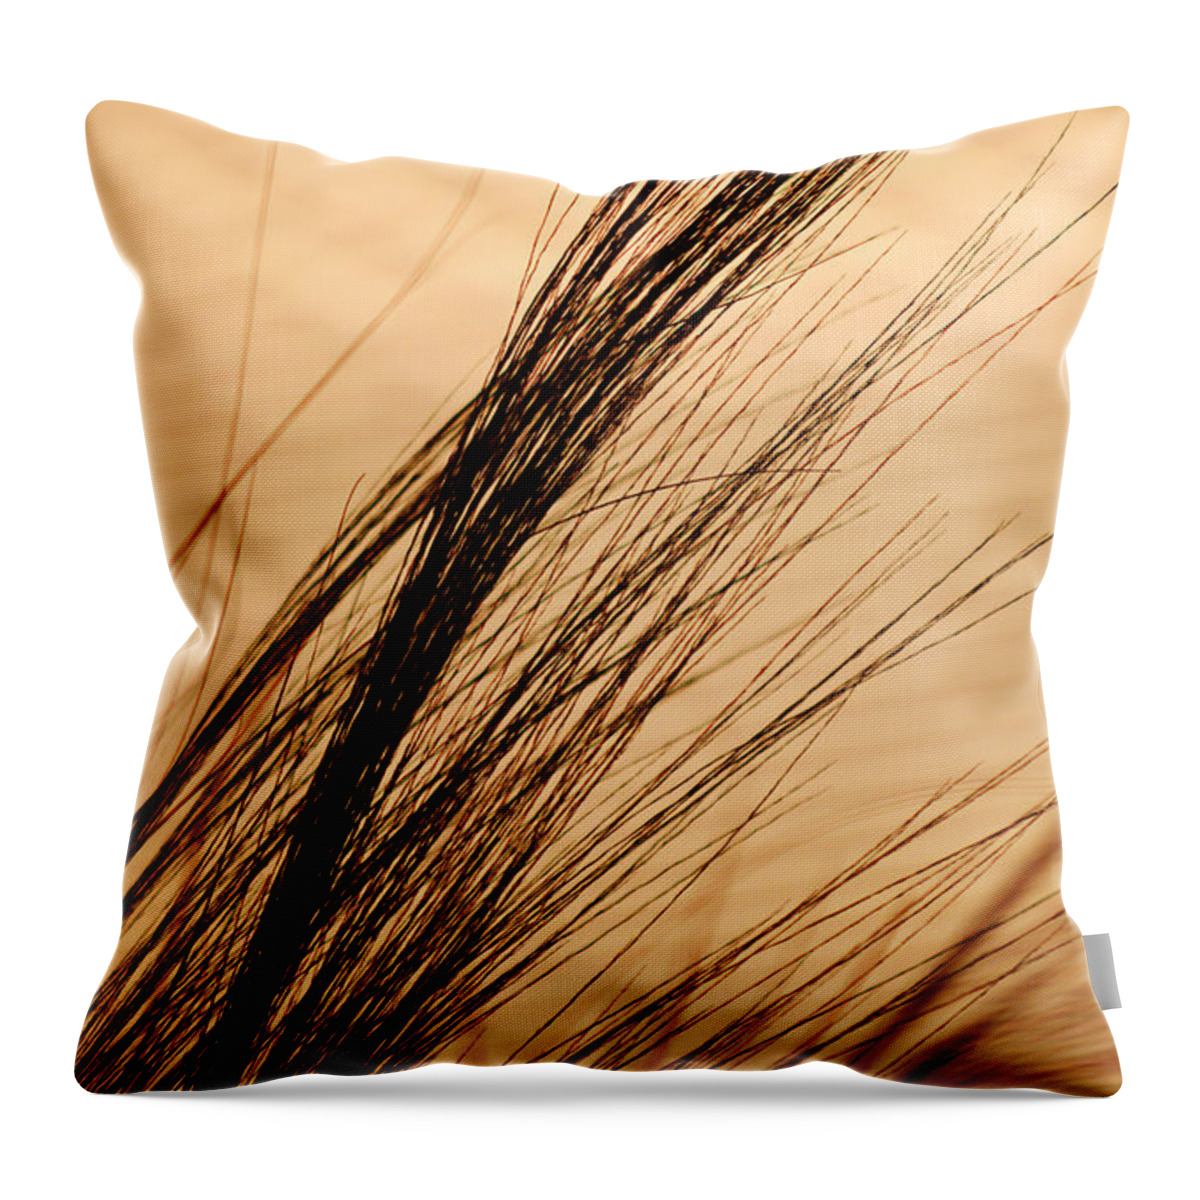 Grass Throw Pillow featuring the photograph Indoor Grasses by Michael McGowan